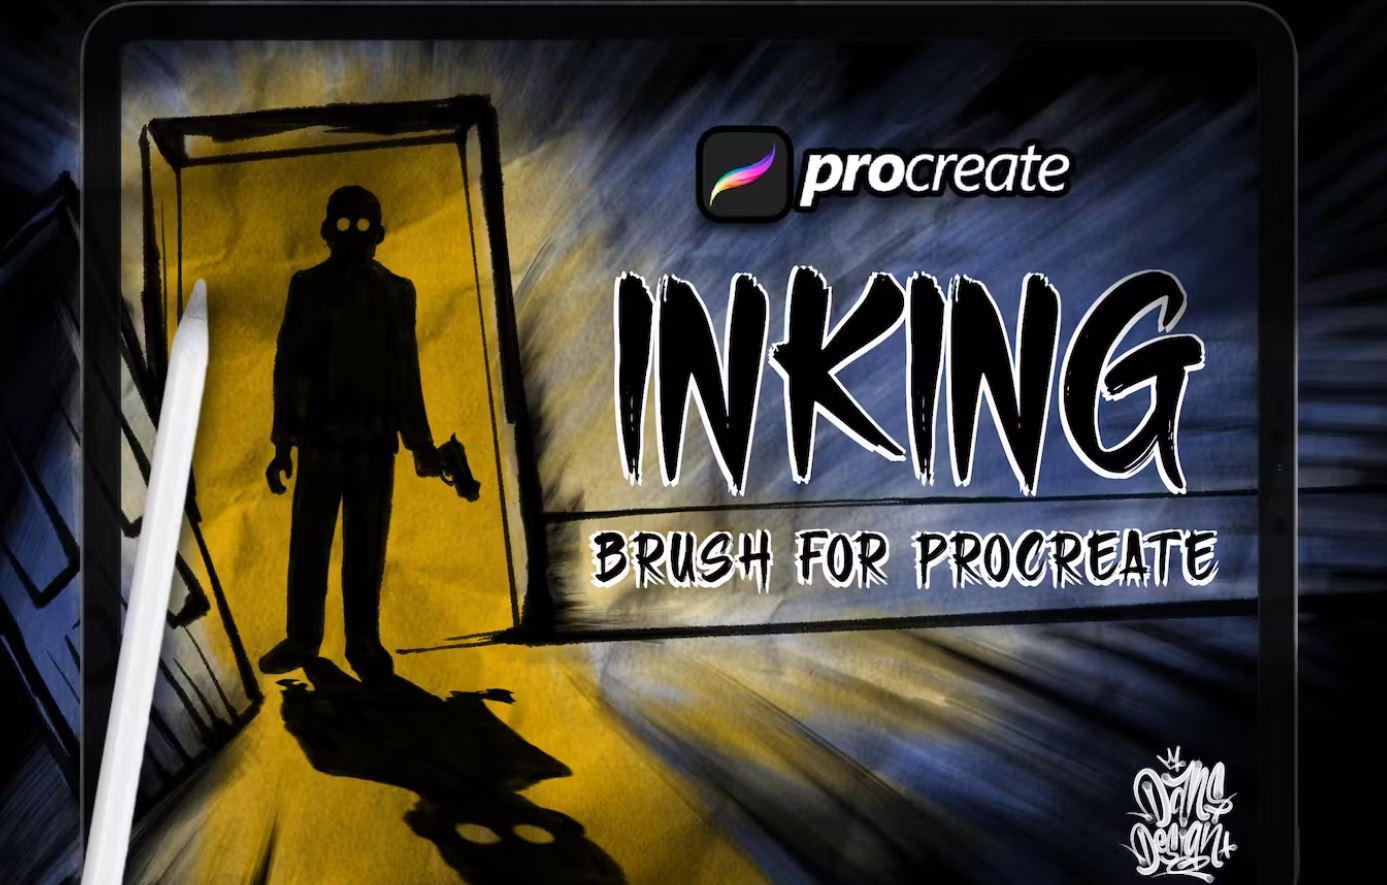 Creative inking brushes for procreate to design ink style projects